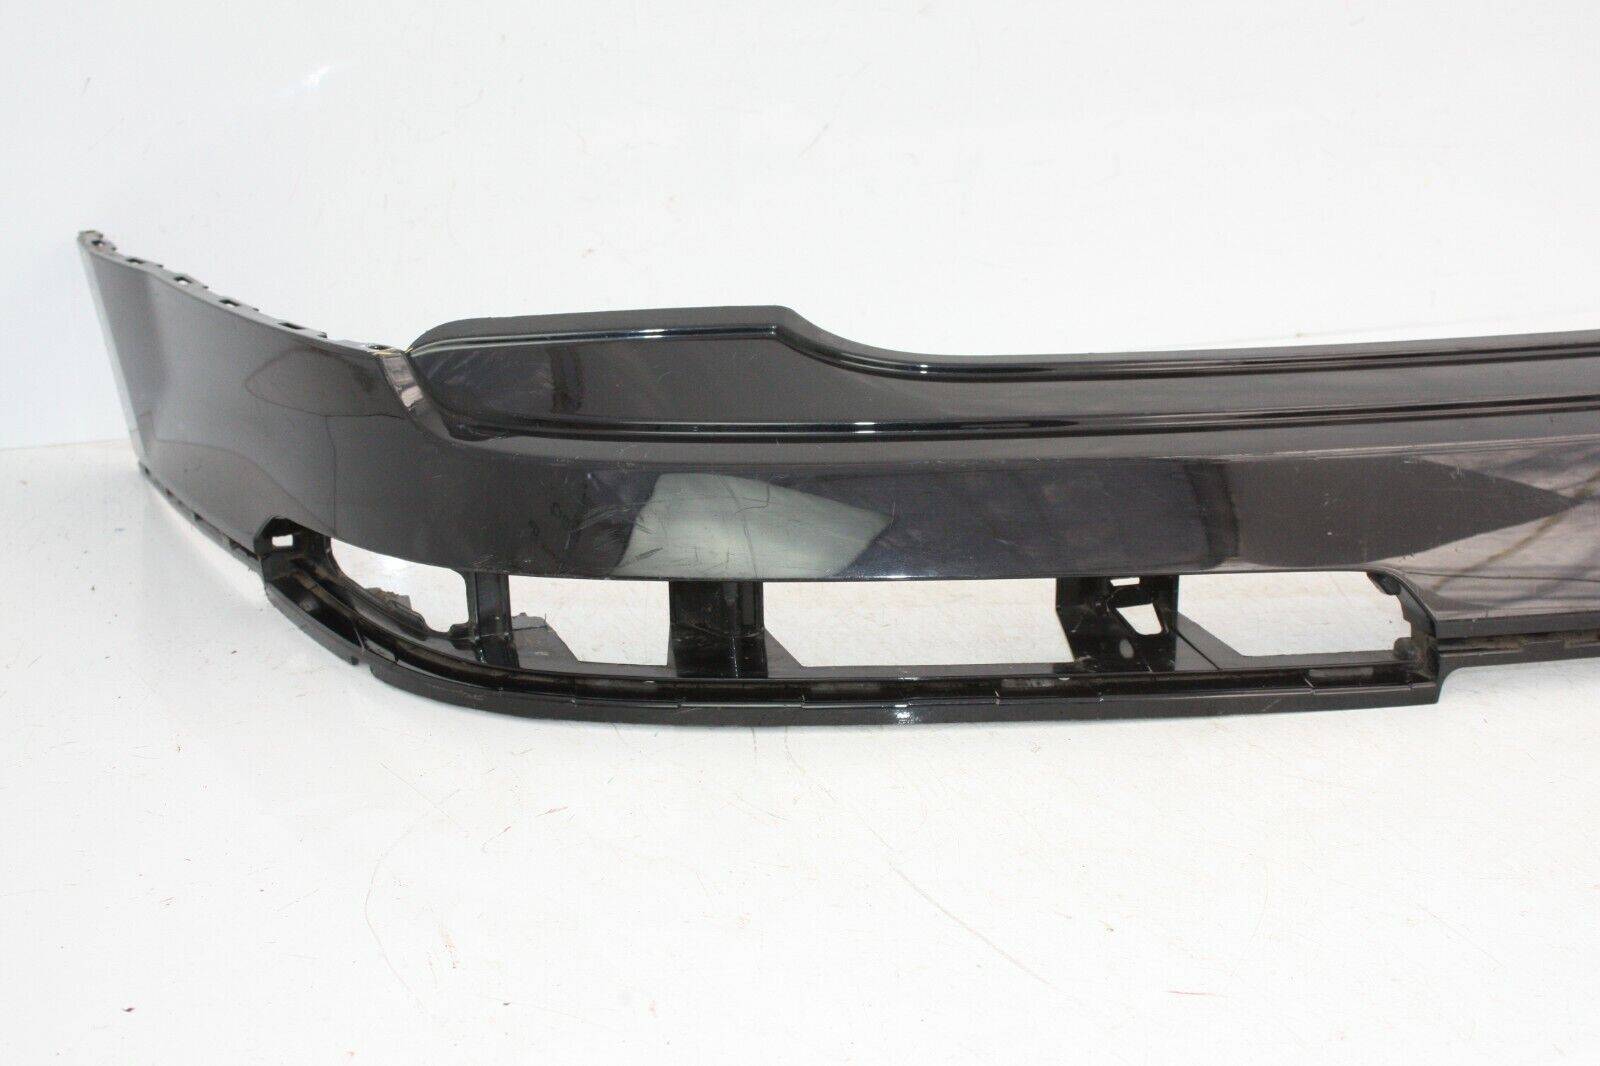 Audi-Q7-S-Line-Rear-Bumper-Upper-Section-2015-TO-2019-4M0807511-175902924573-2